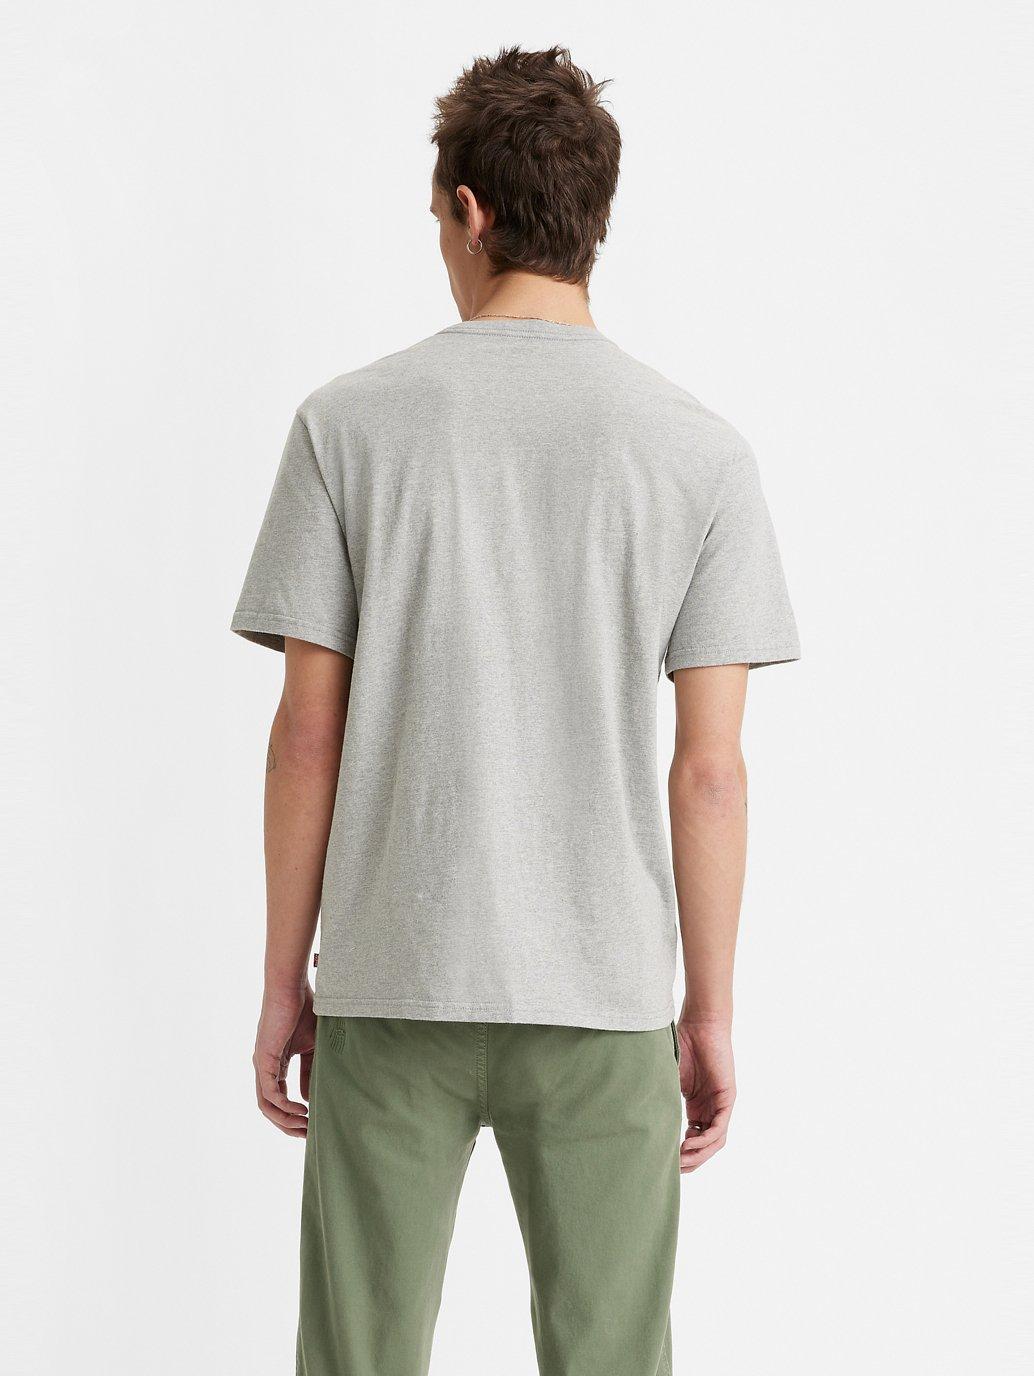 Buy Levi's® Men's Relaxed Fit Short Sleeve T-Shirt | Levi’s Official ...